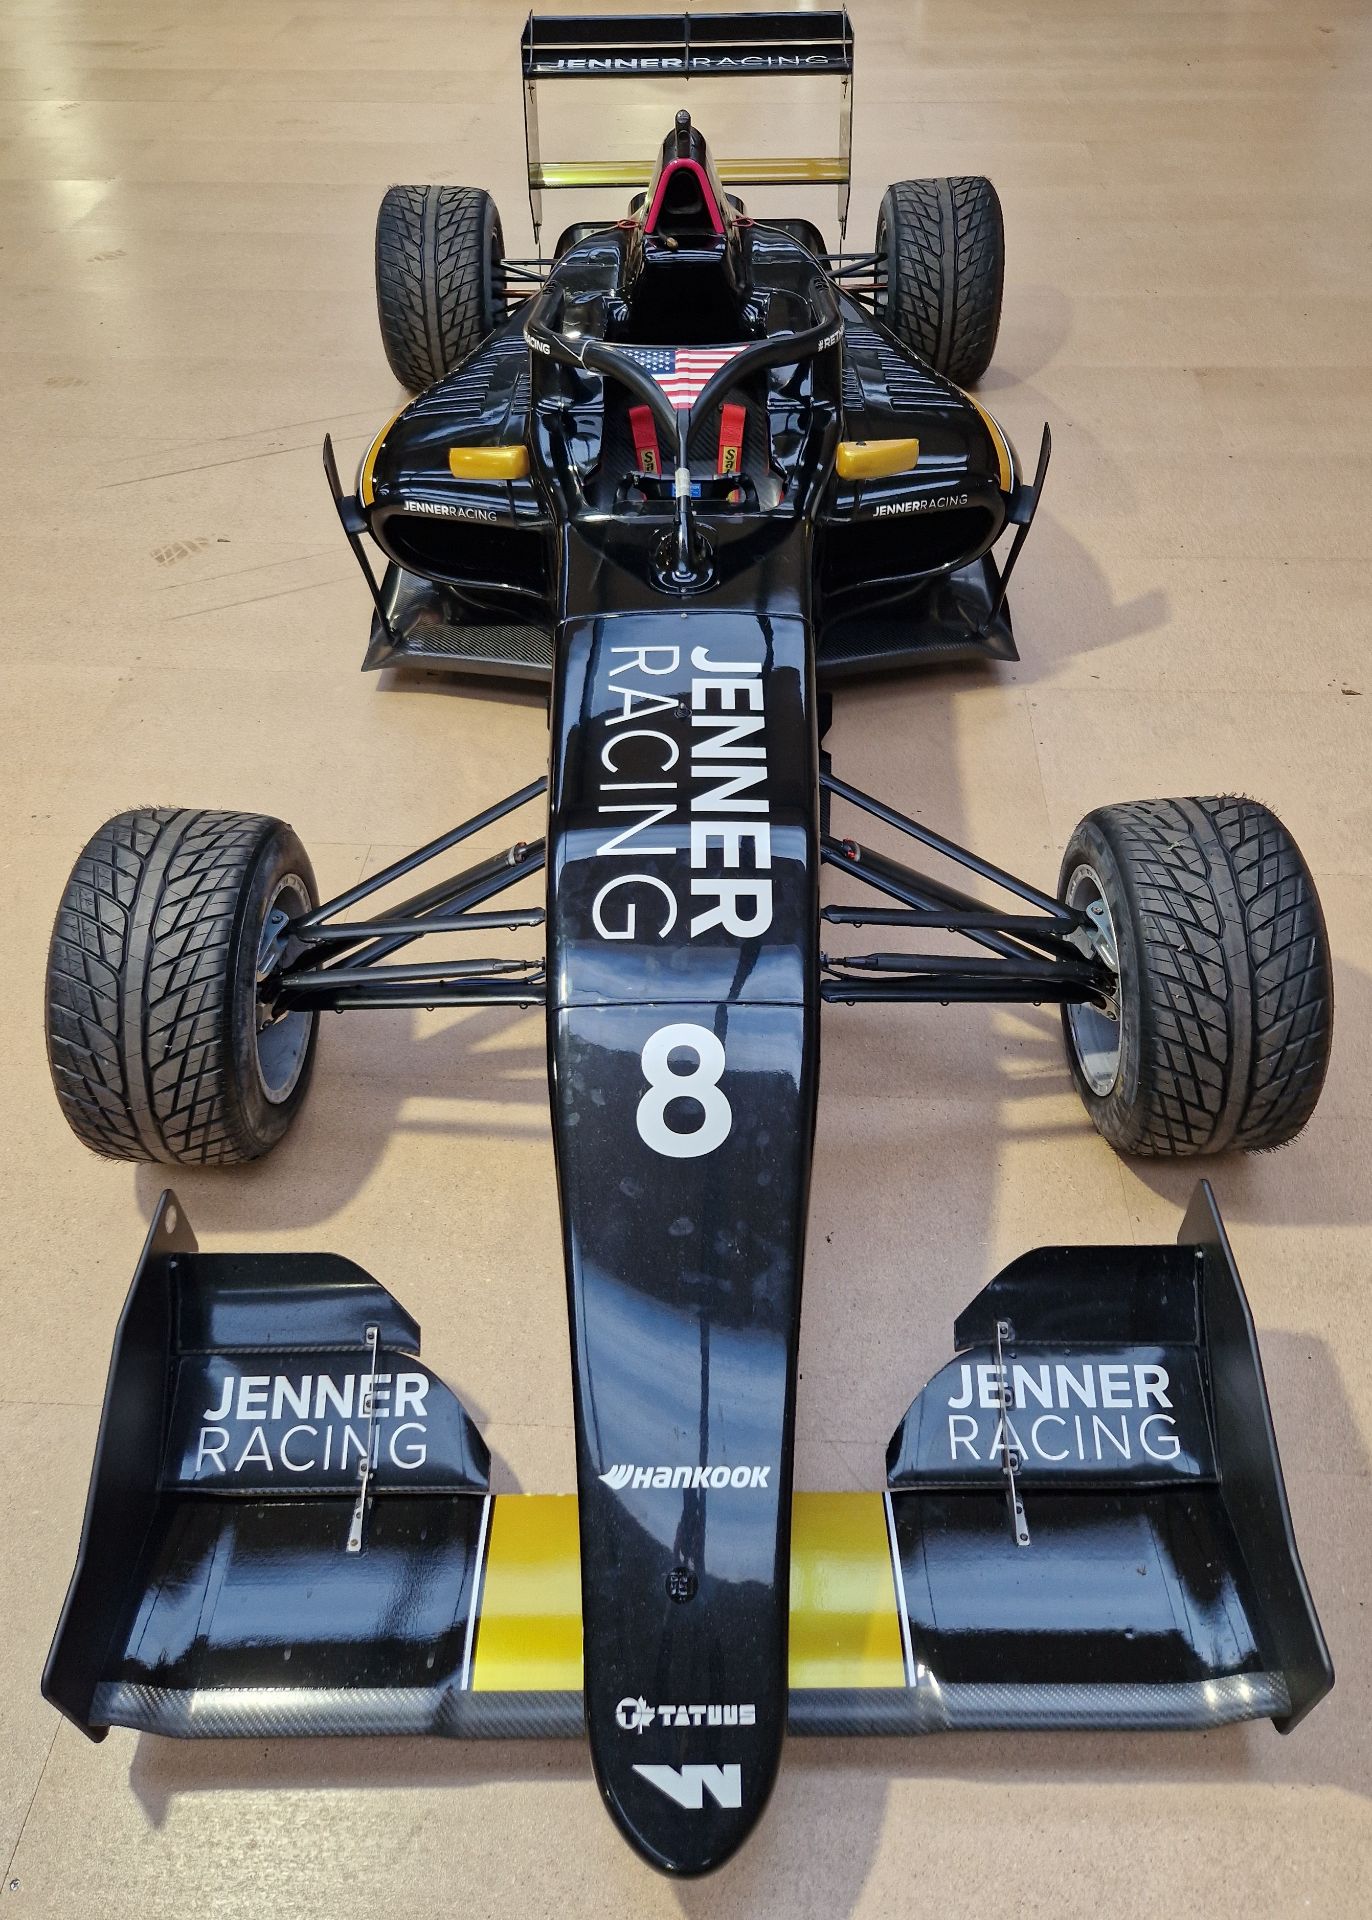 One TATUUS F3 T-318 Alfa Romeo Race Car Chassis No. 039 (2019) Finished in JENNER RACING Livery as - Image 3 of 10